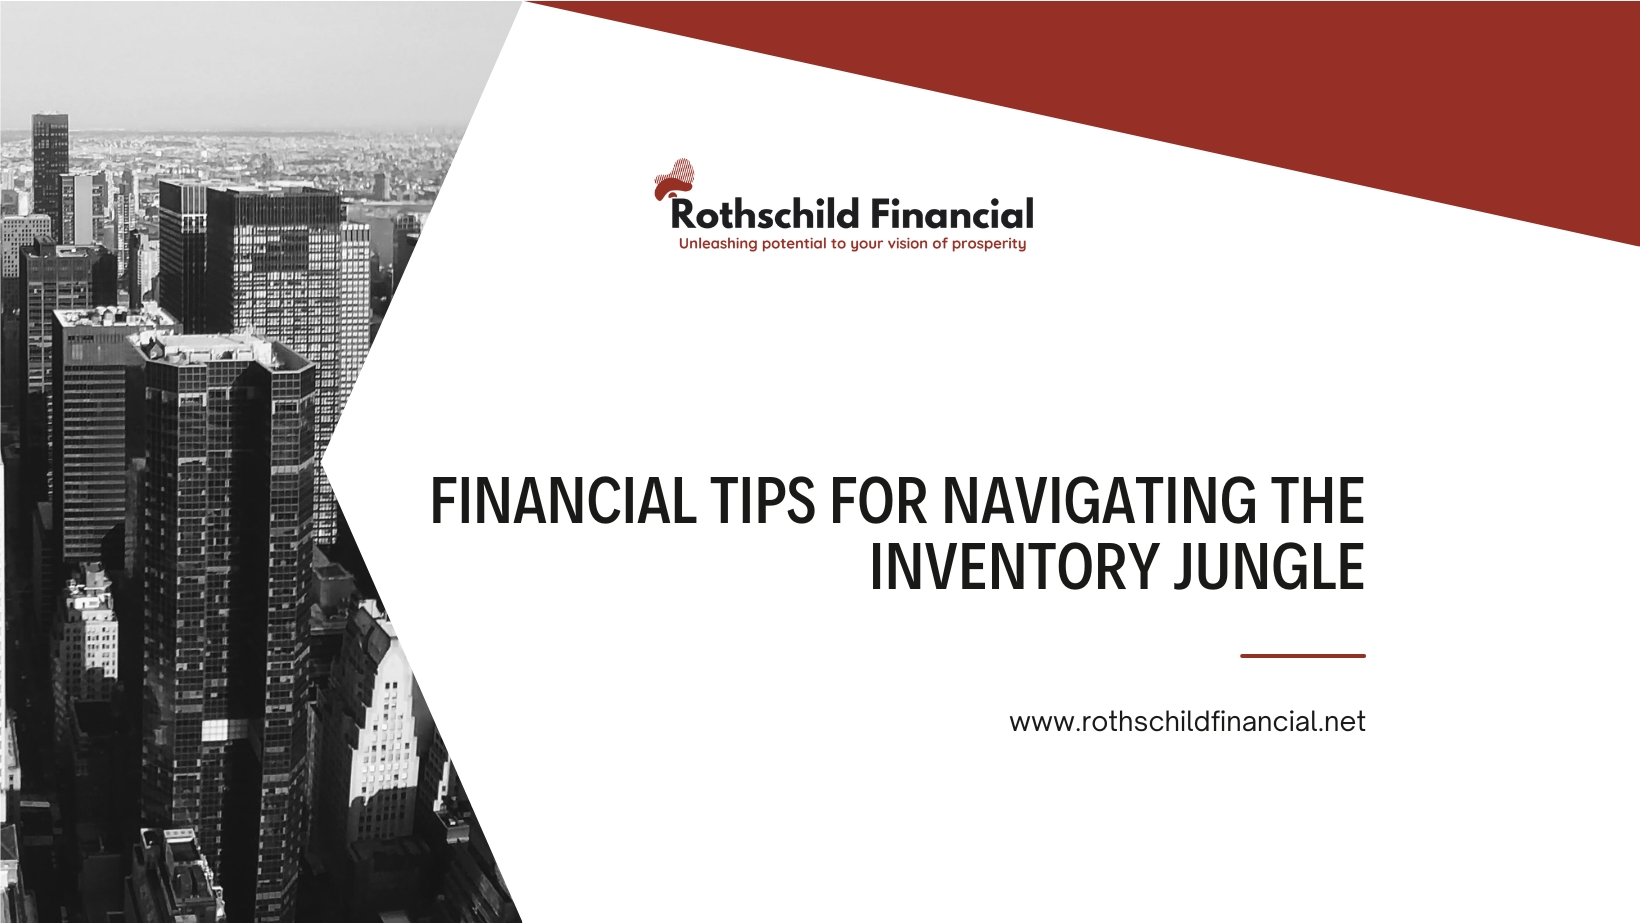 Financial Tips for Navigating the Inventory Jungle